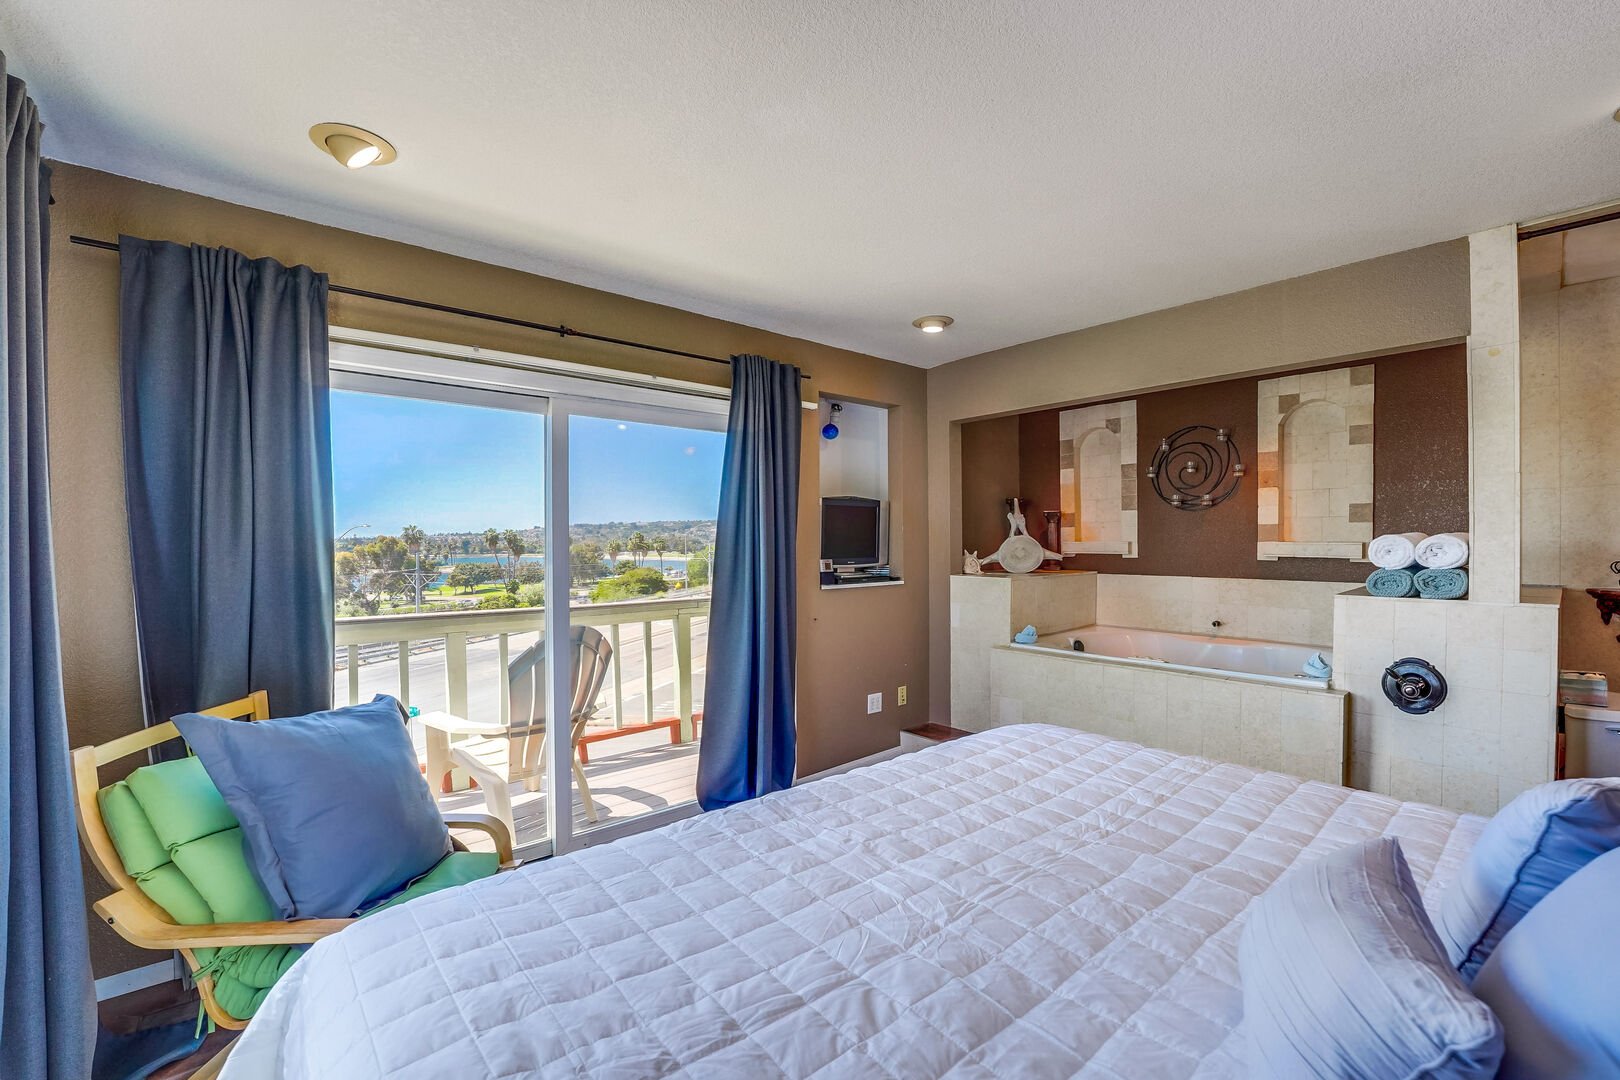 Private master bedroom with private balcony overlooking Mission Bay. Open jacuzzi tub and bathroom